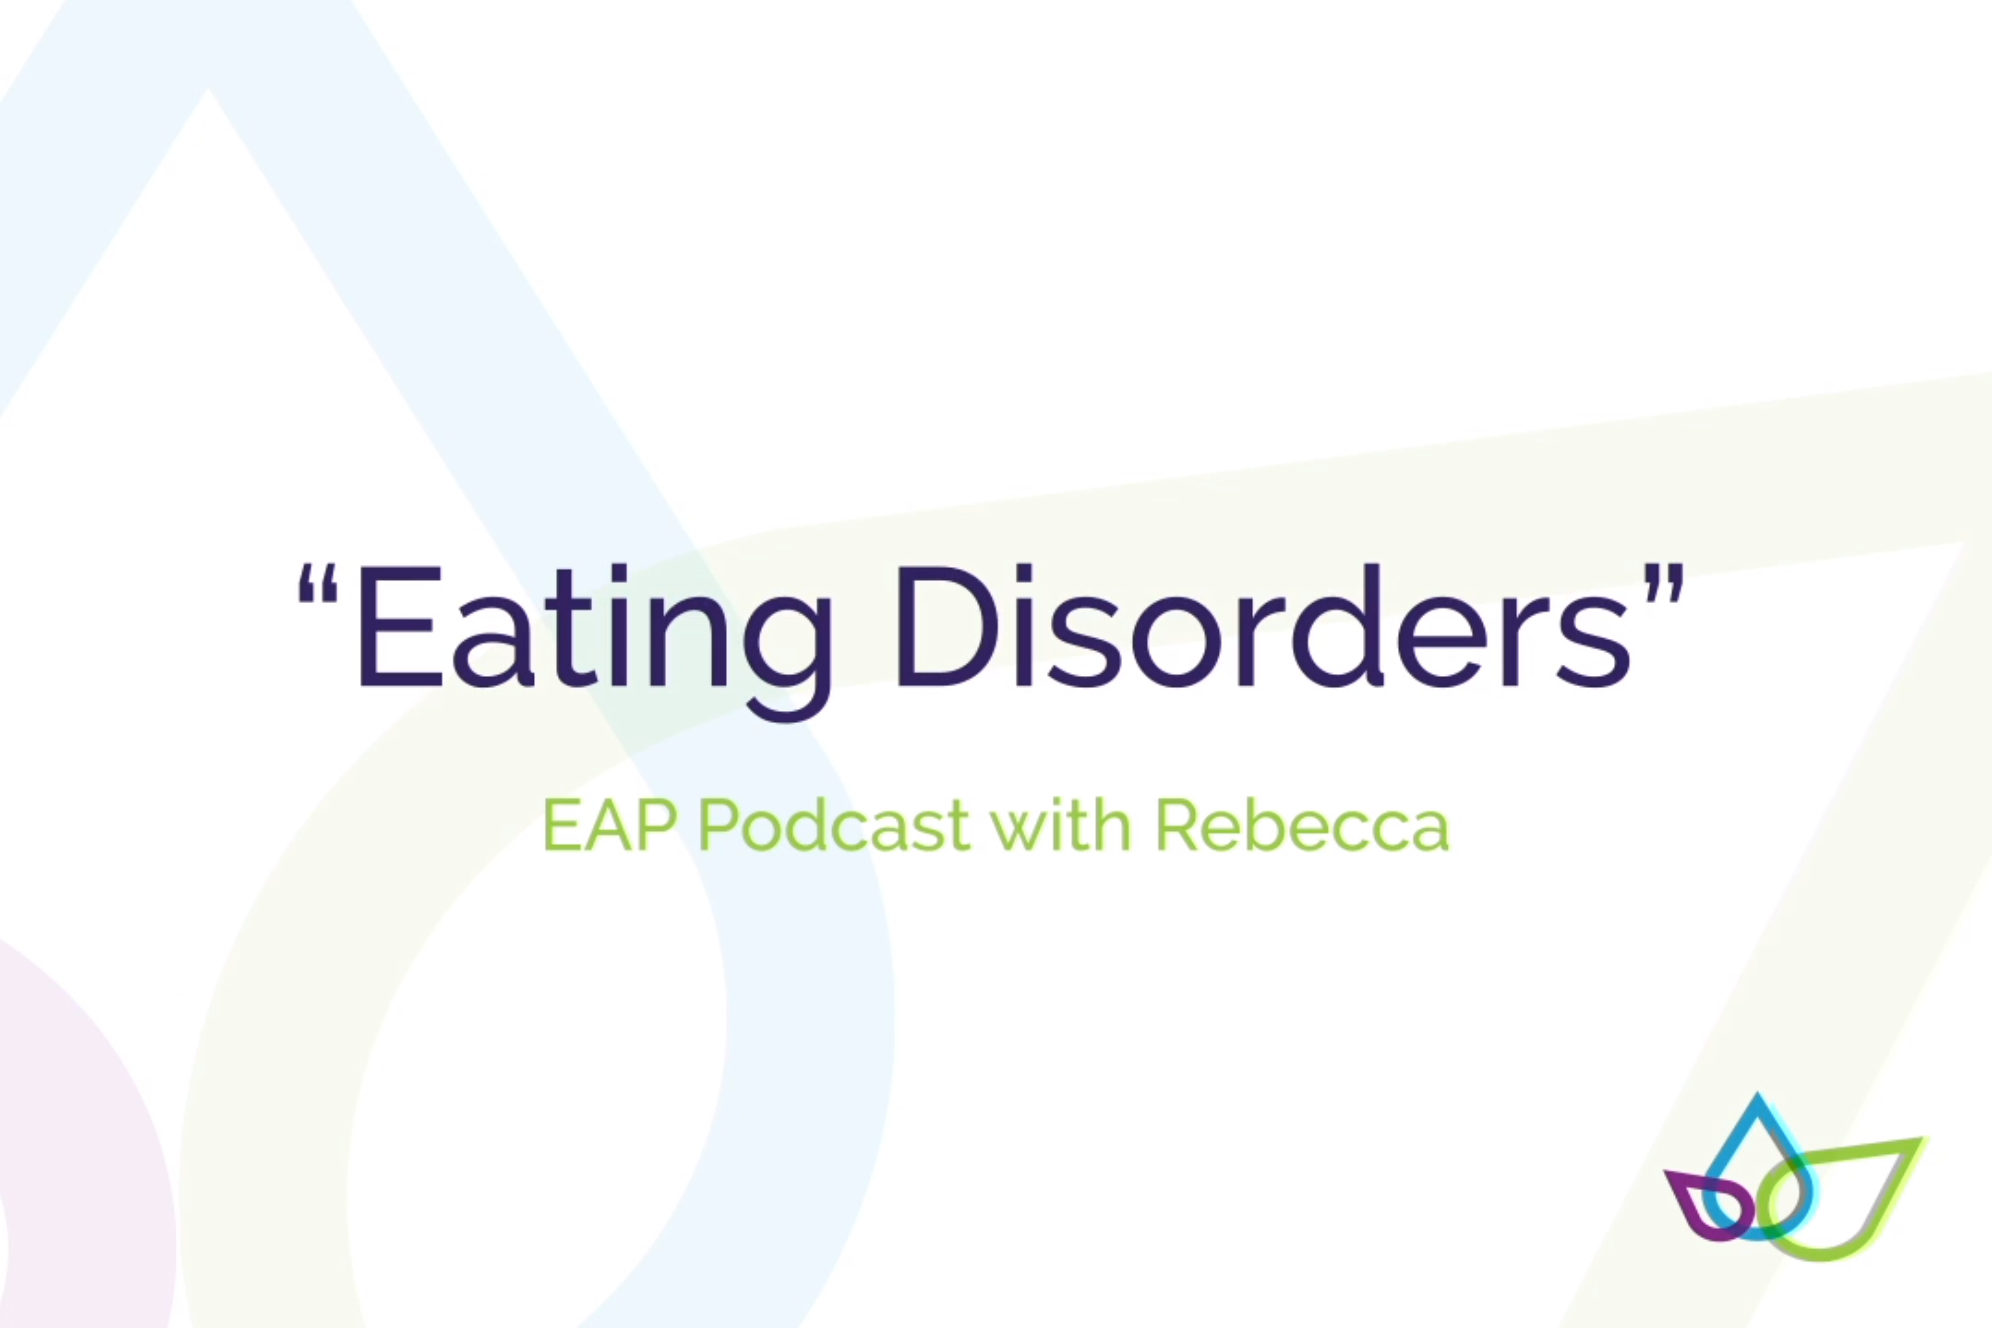 Eating Disorders podcast